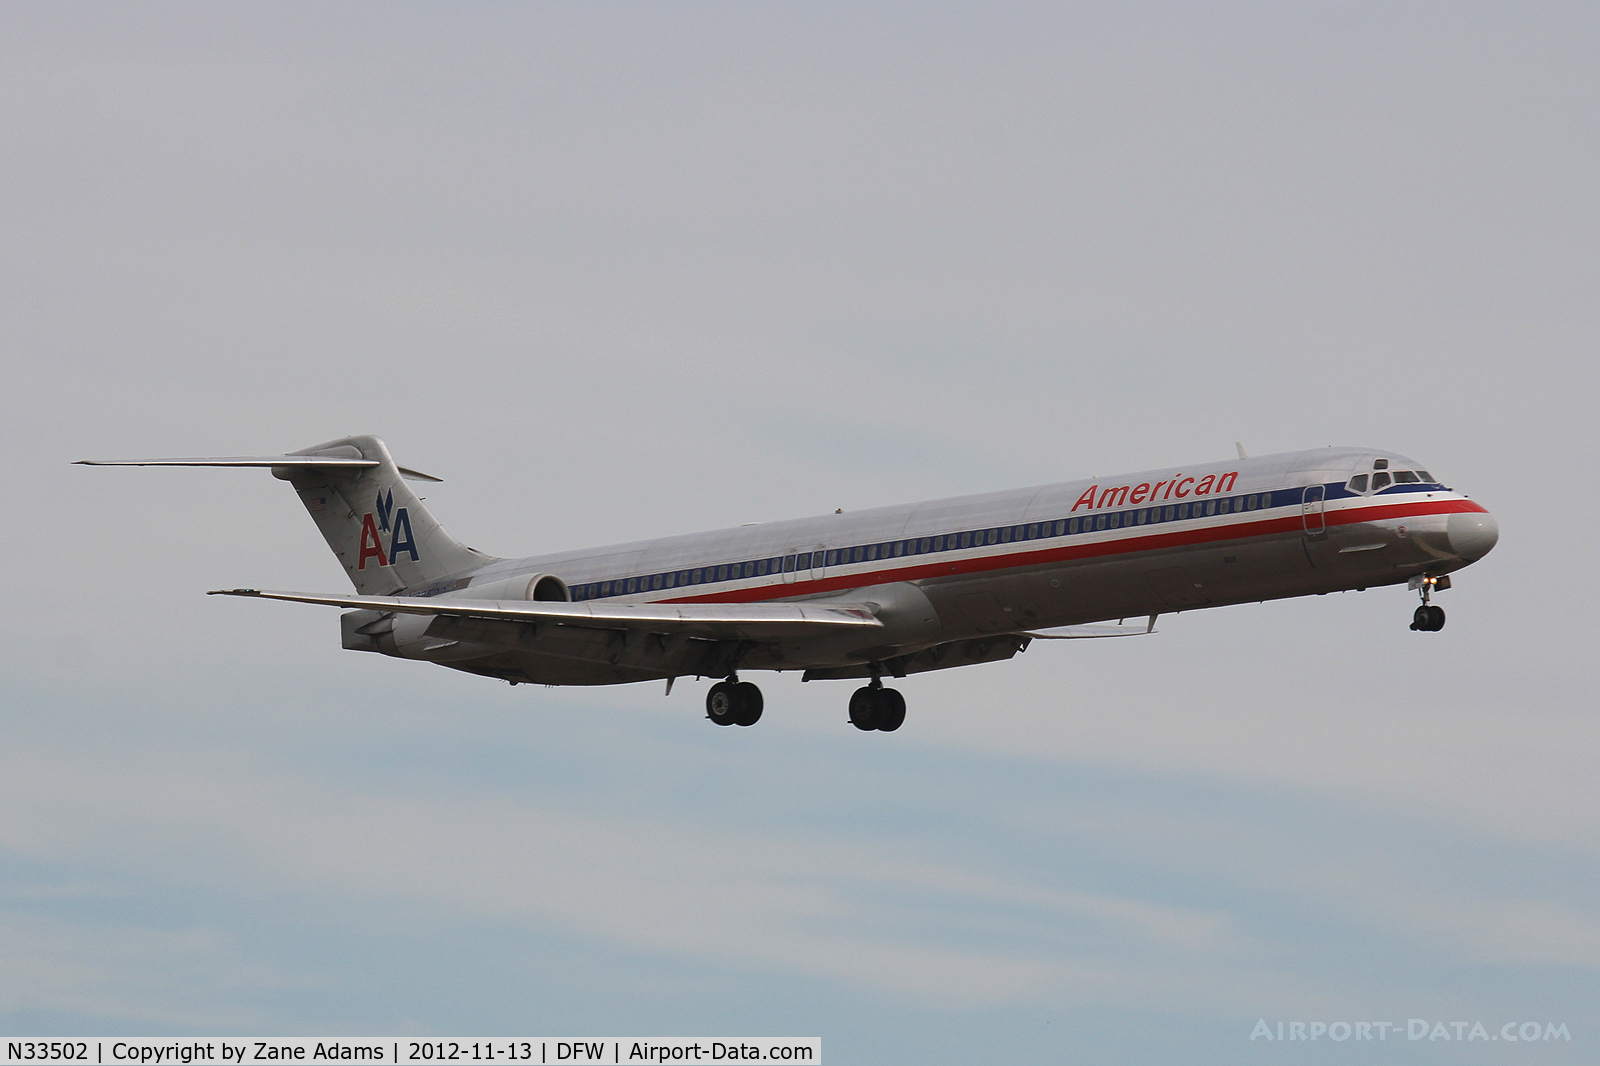 N33502, 1989 McDonnell Douglas MD-82 (DC-9-82) C/N 49739, American Airlines landing at DFW Airport